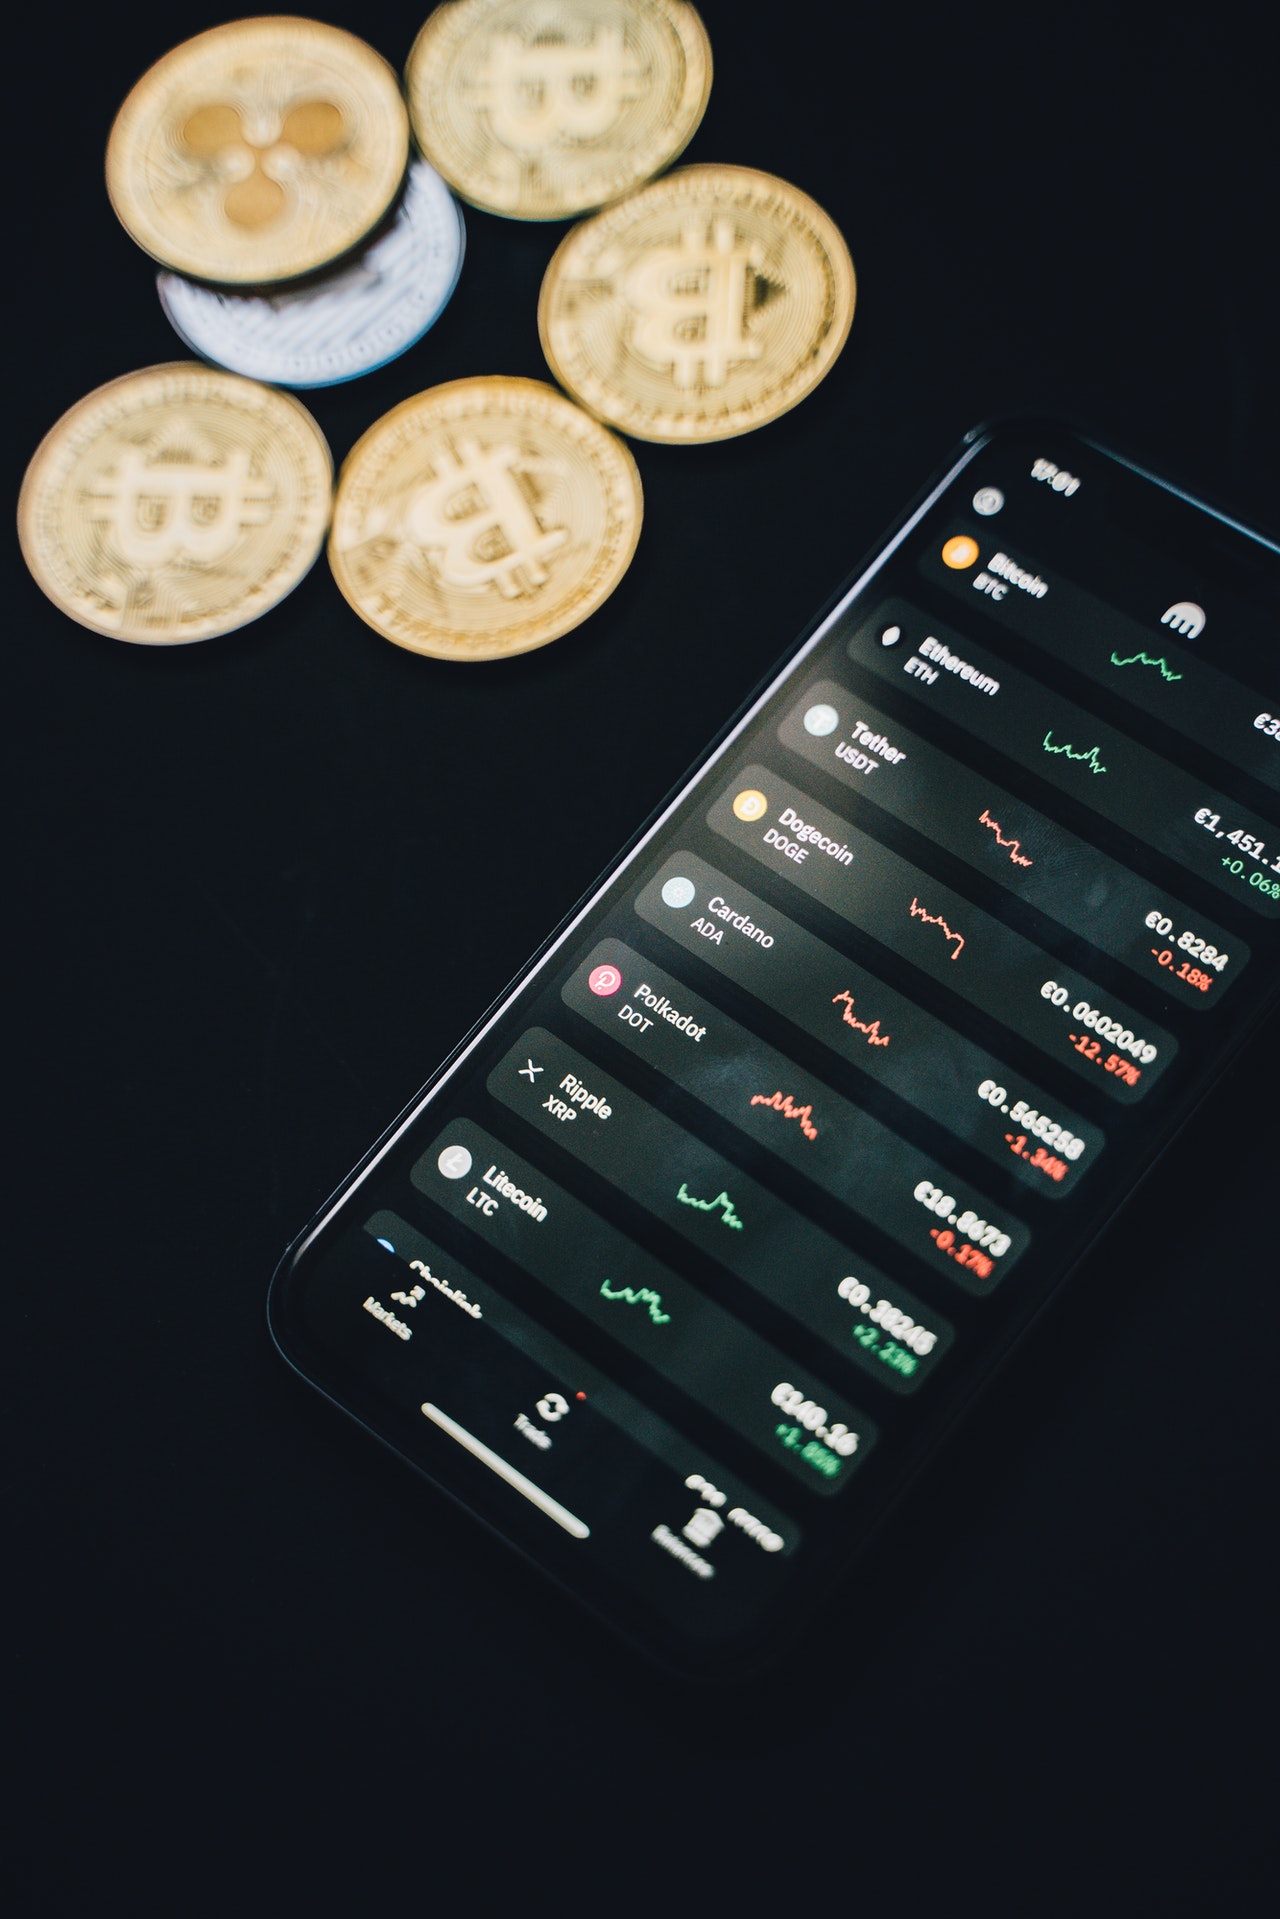 The process that automates crypto trading might be an excellent option for you. Source: Pexels.